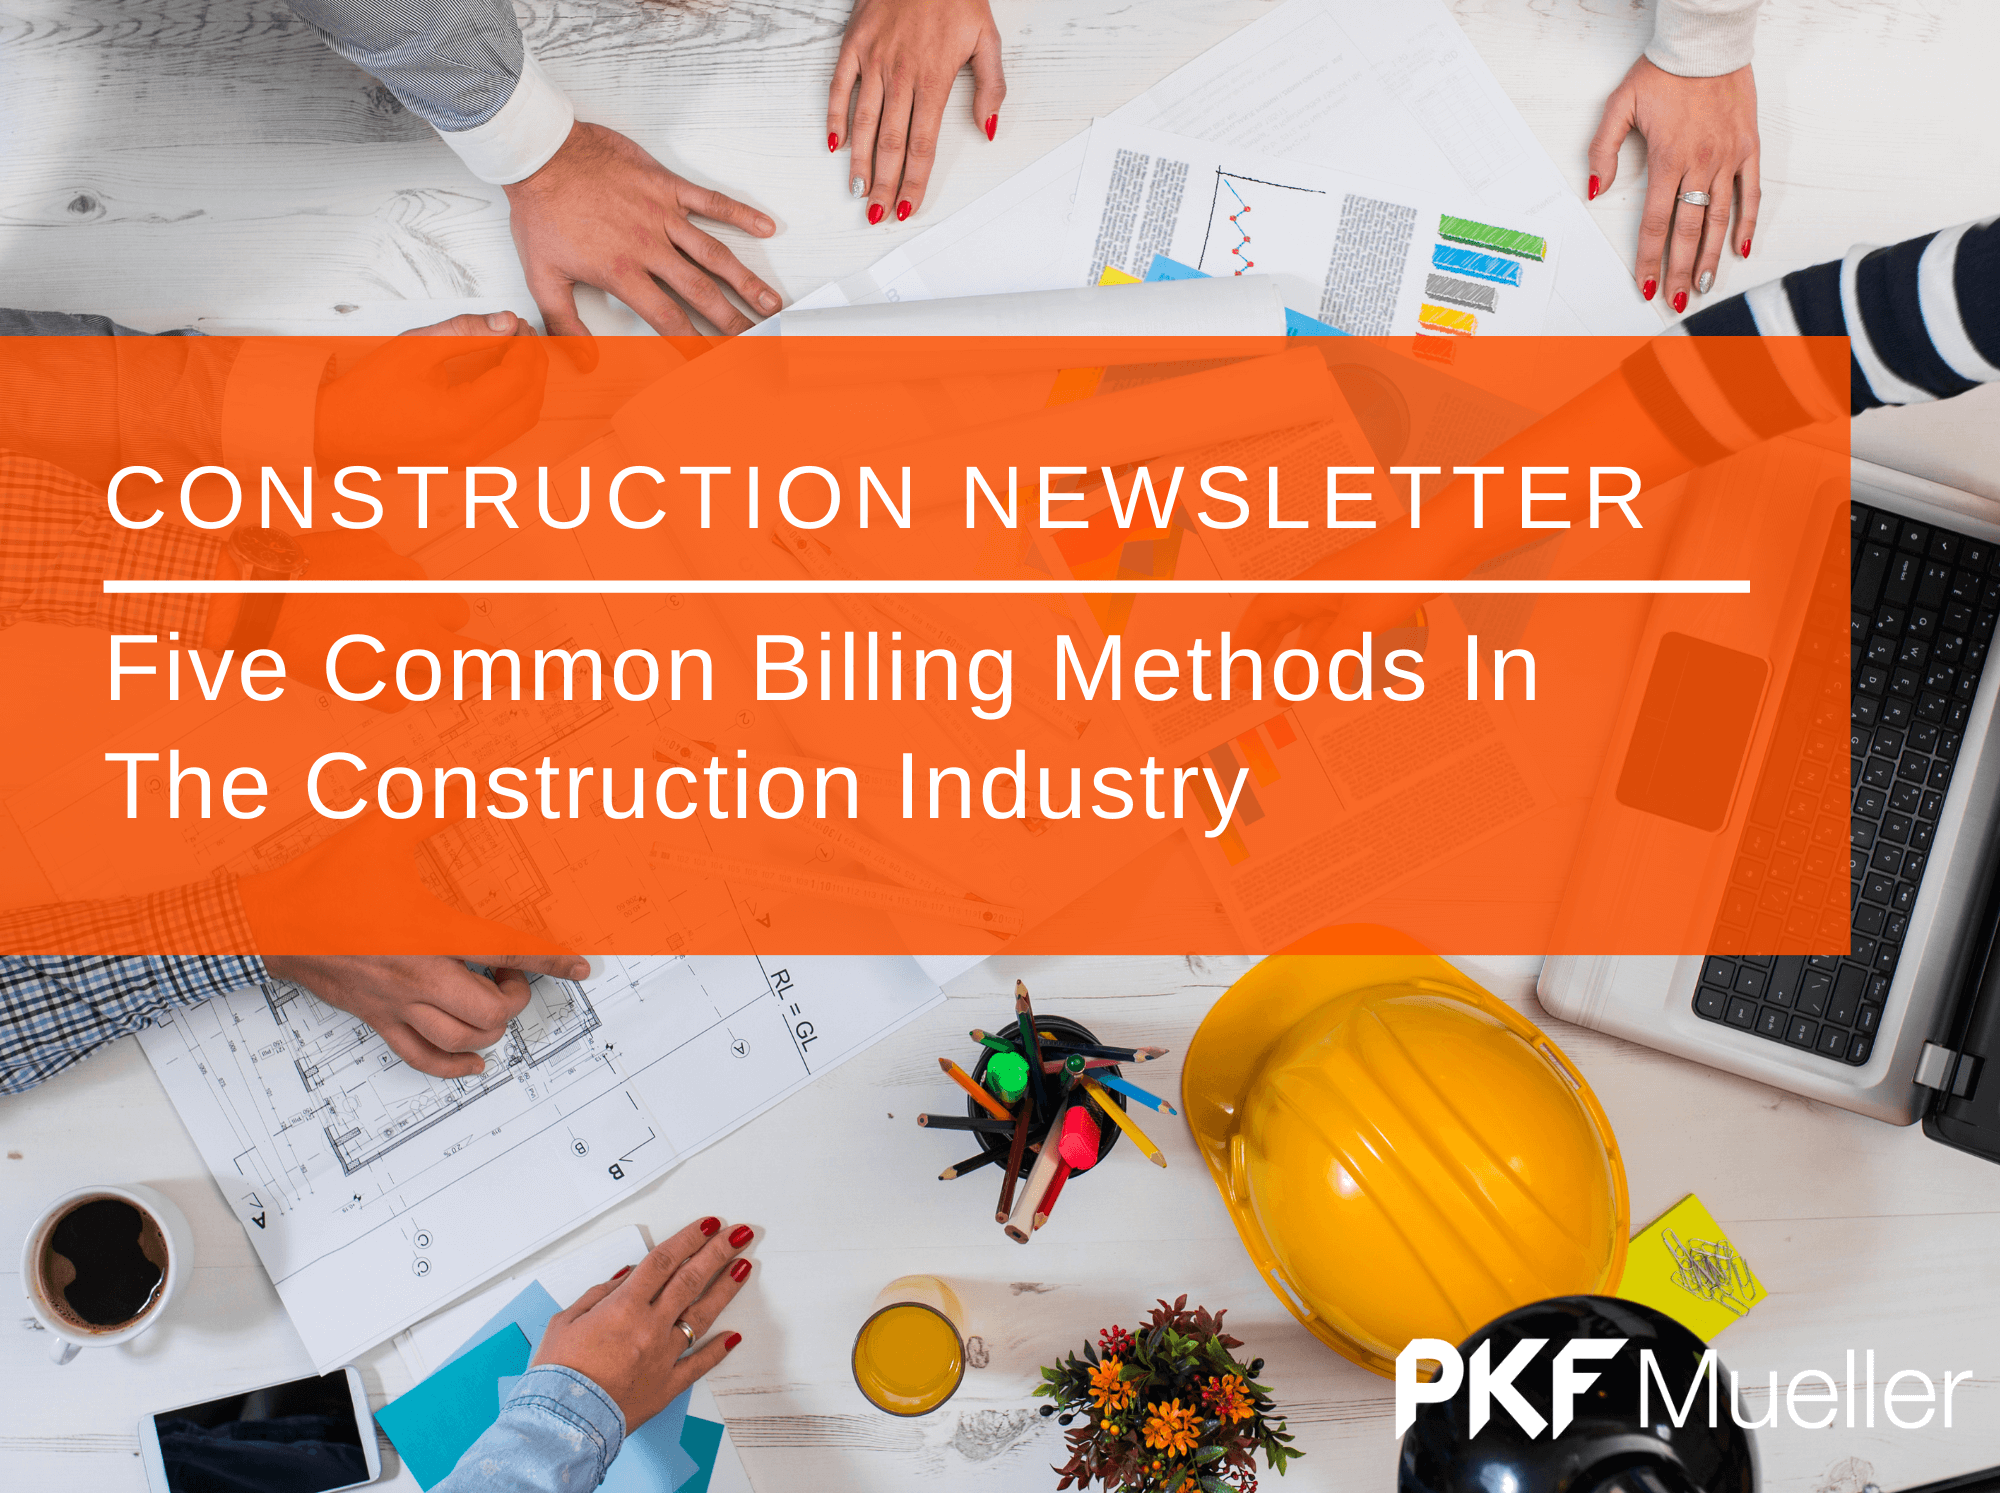 Five Common Billing Methods in the Construction Industry